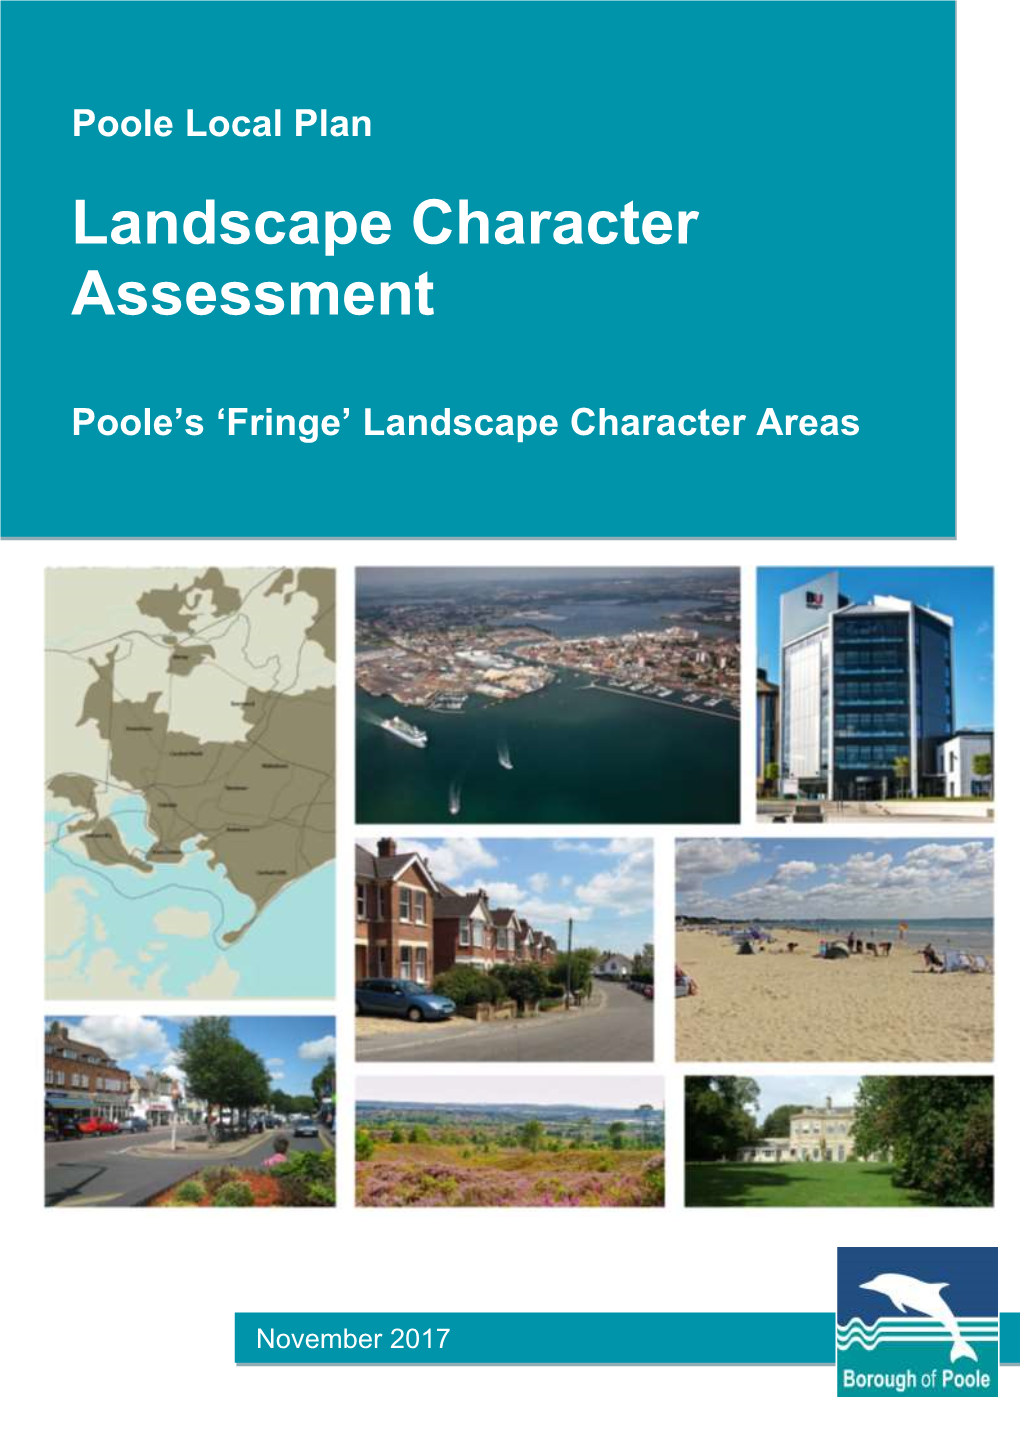 Poole Local Plan Landscape Character Assessment